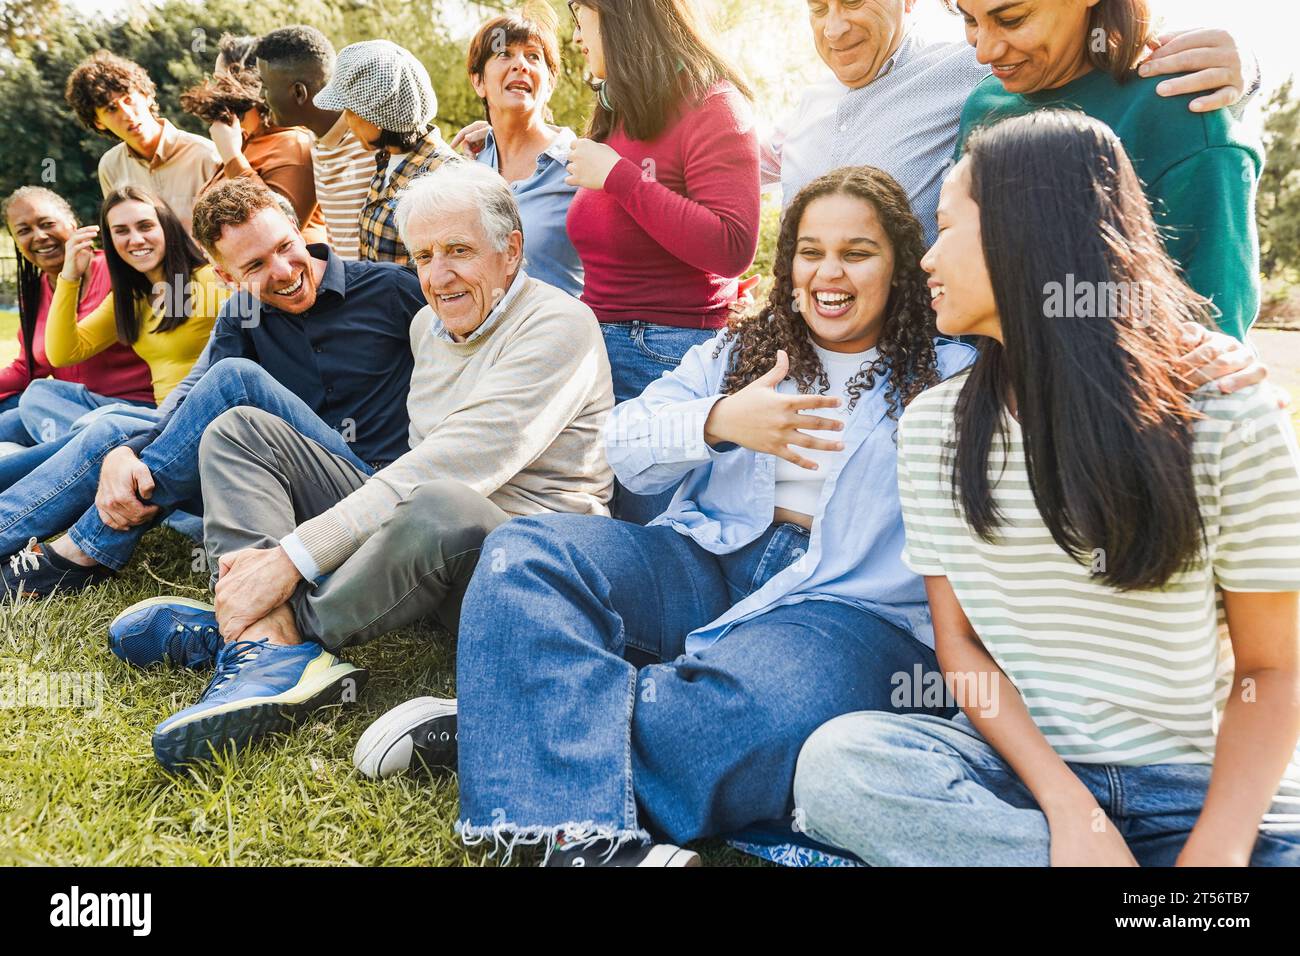 Group of multigenerational people smiling in front of camera - Multiracial friends of different ages having fun together - Main focus on senior man wi Stock Photo